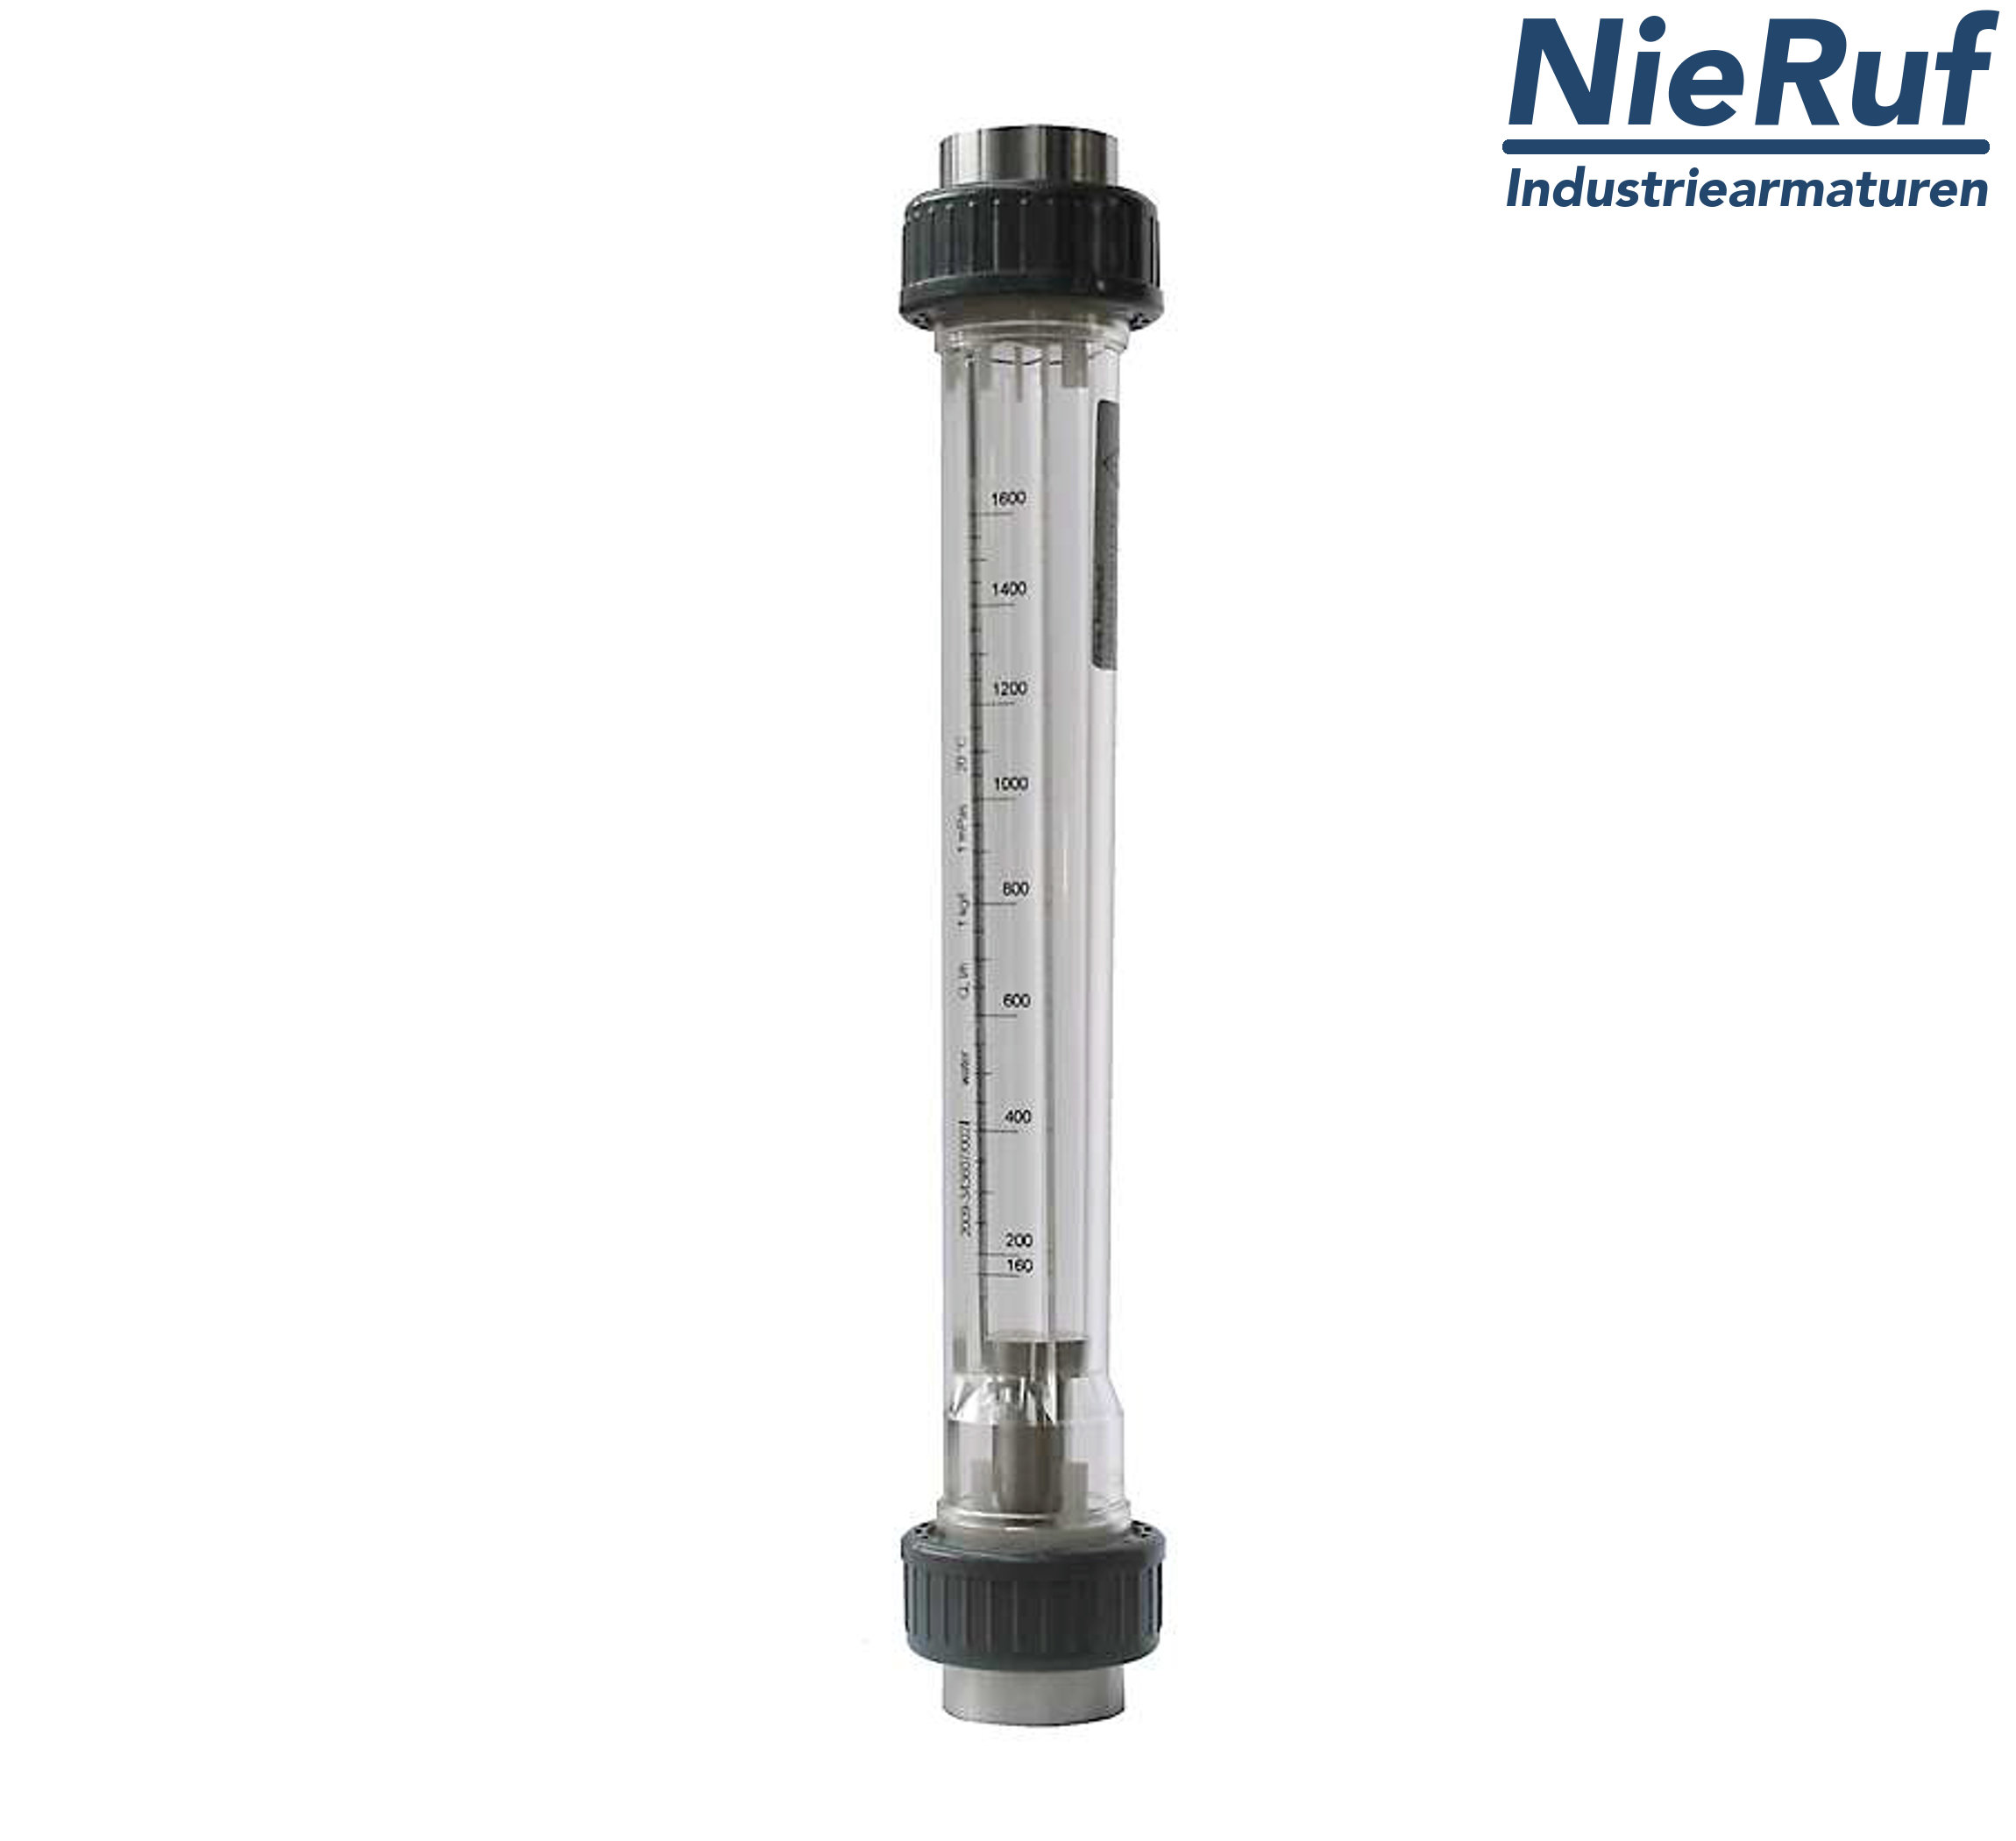 Variable area flowmeter 1 1/4" inch 4000.0 - 16000 l/h water FKM